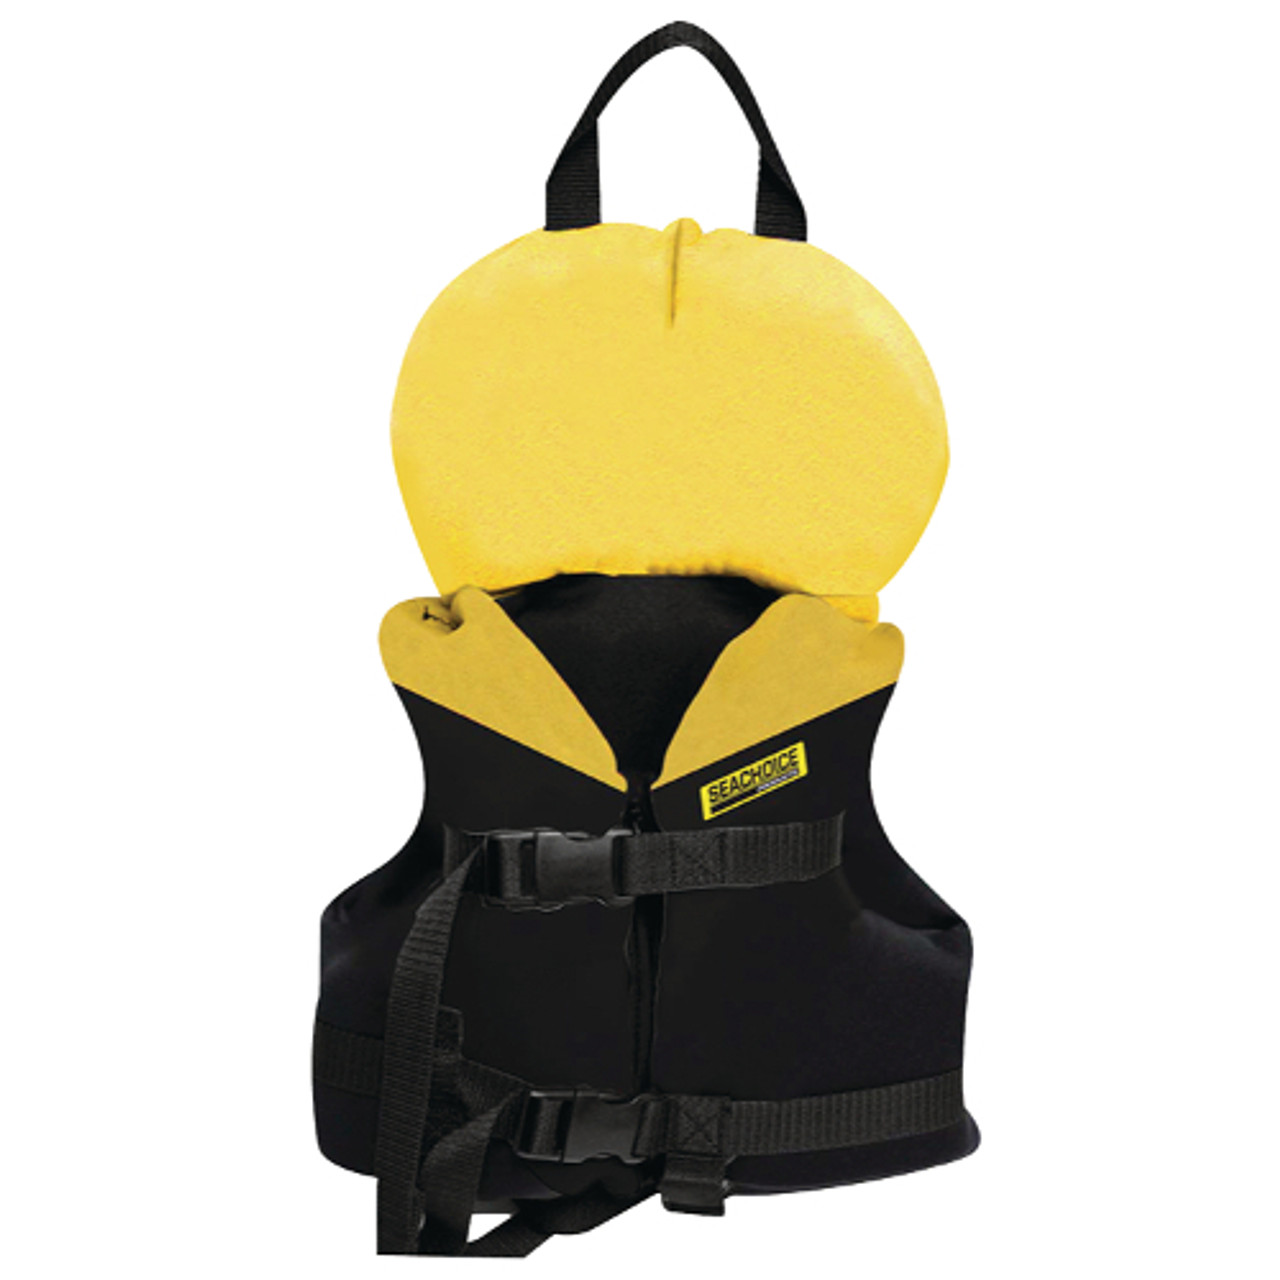 Seachoice Yellow and Black Neoprene Multi-Sport Infant Sized Type II PFD Safety & Life Vest for Boats